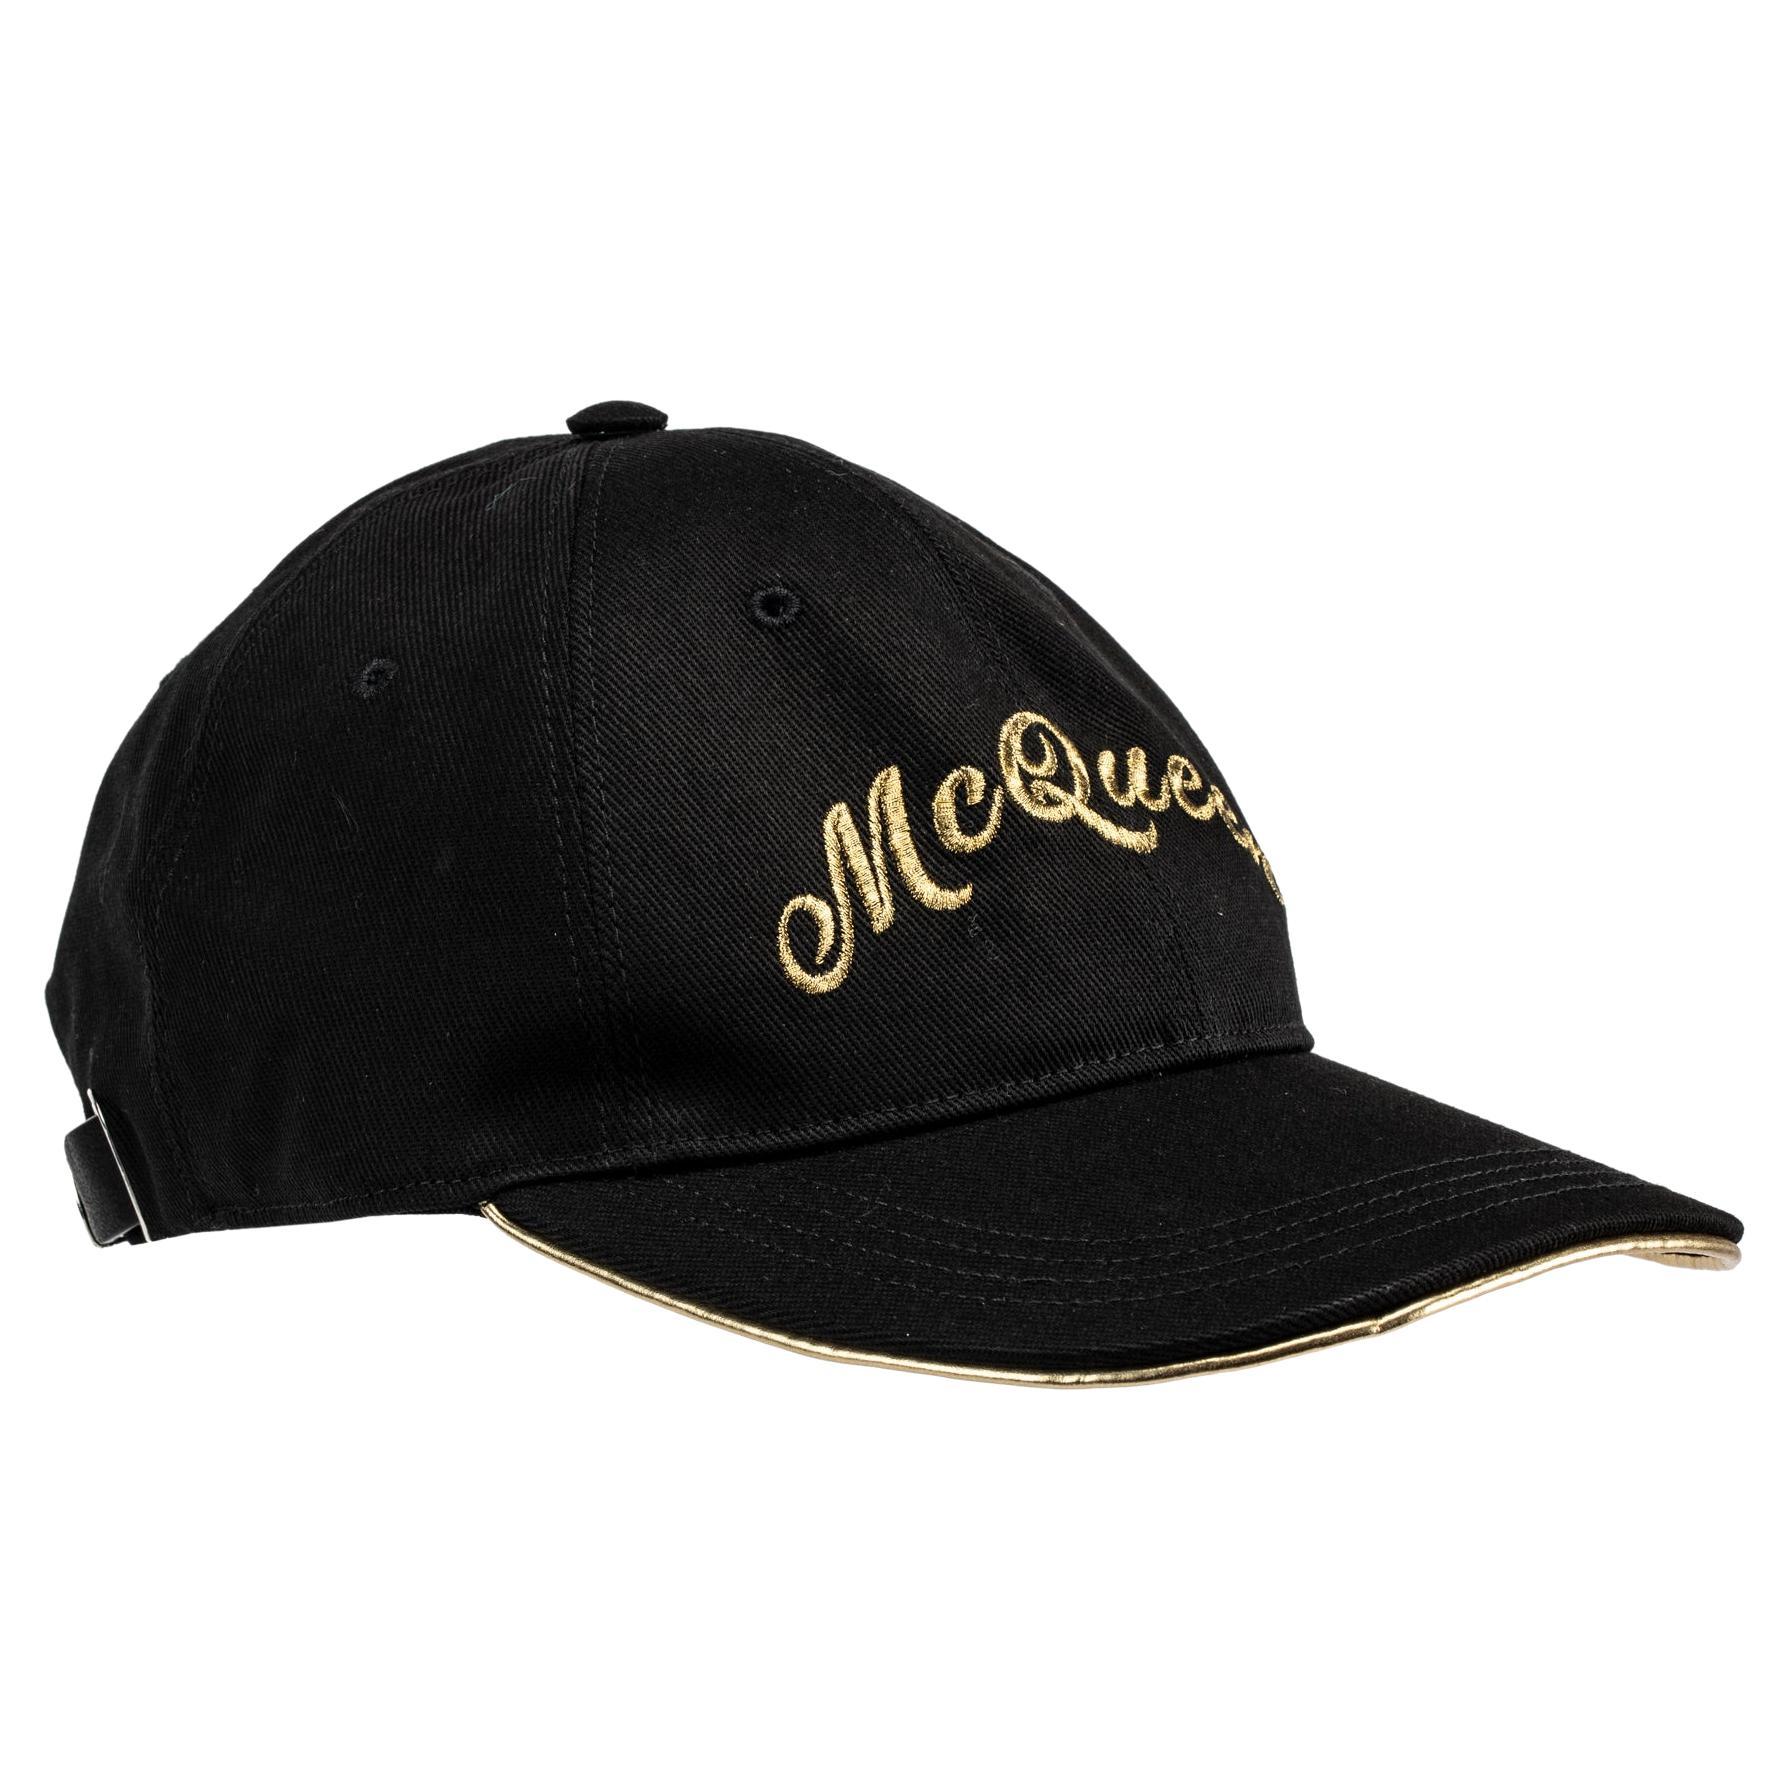 Alexander McQueen Embroidered Cap Black & Gold For Sale